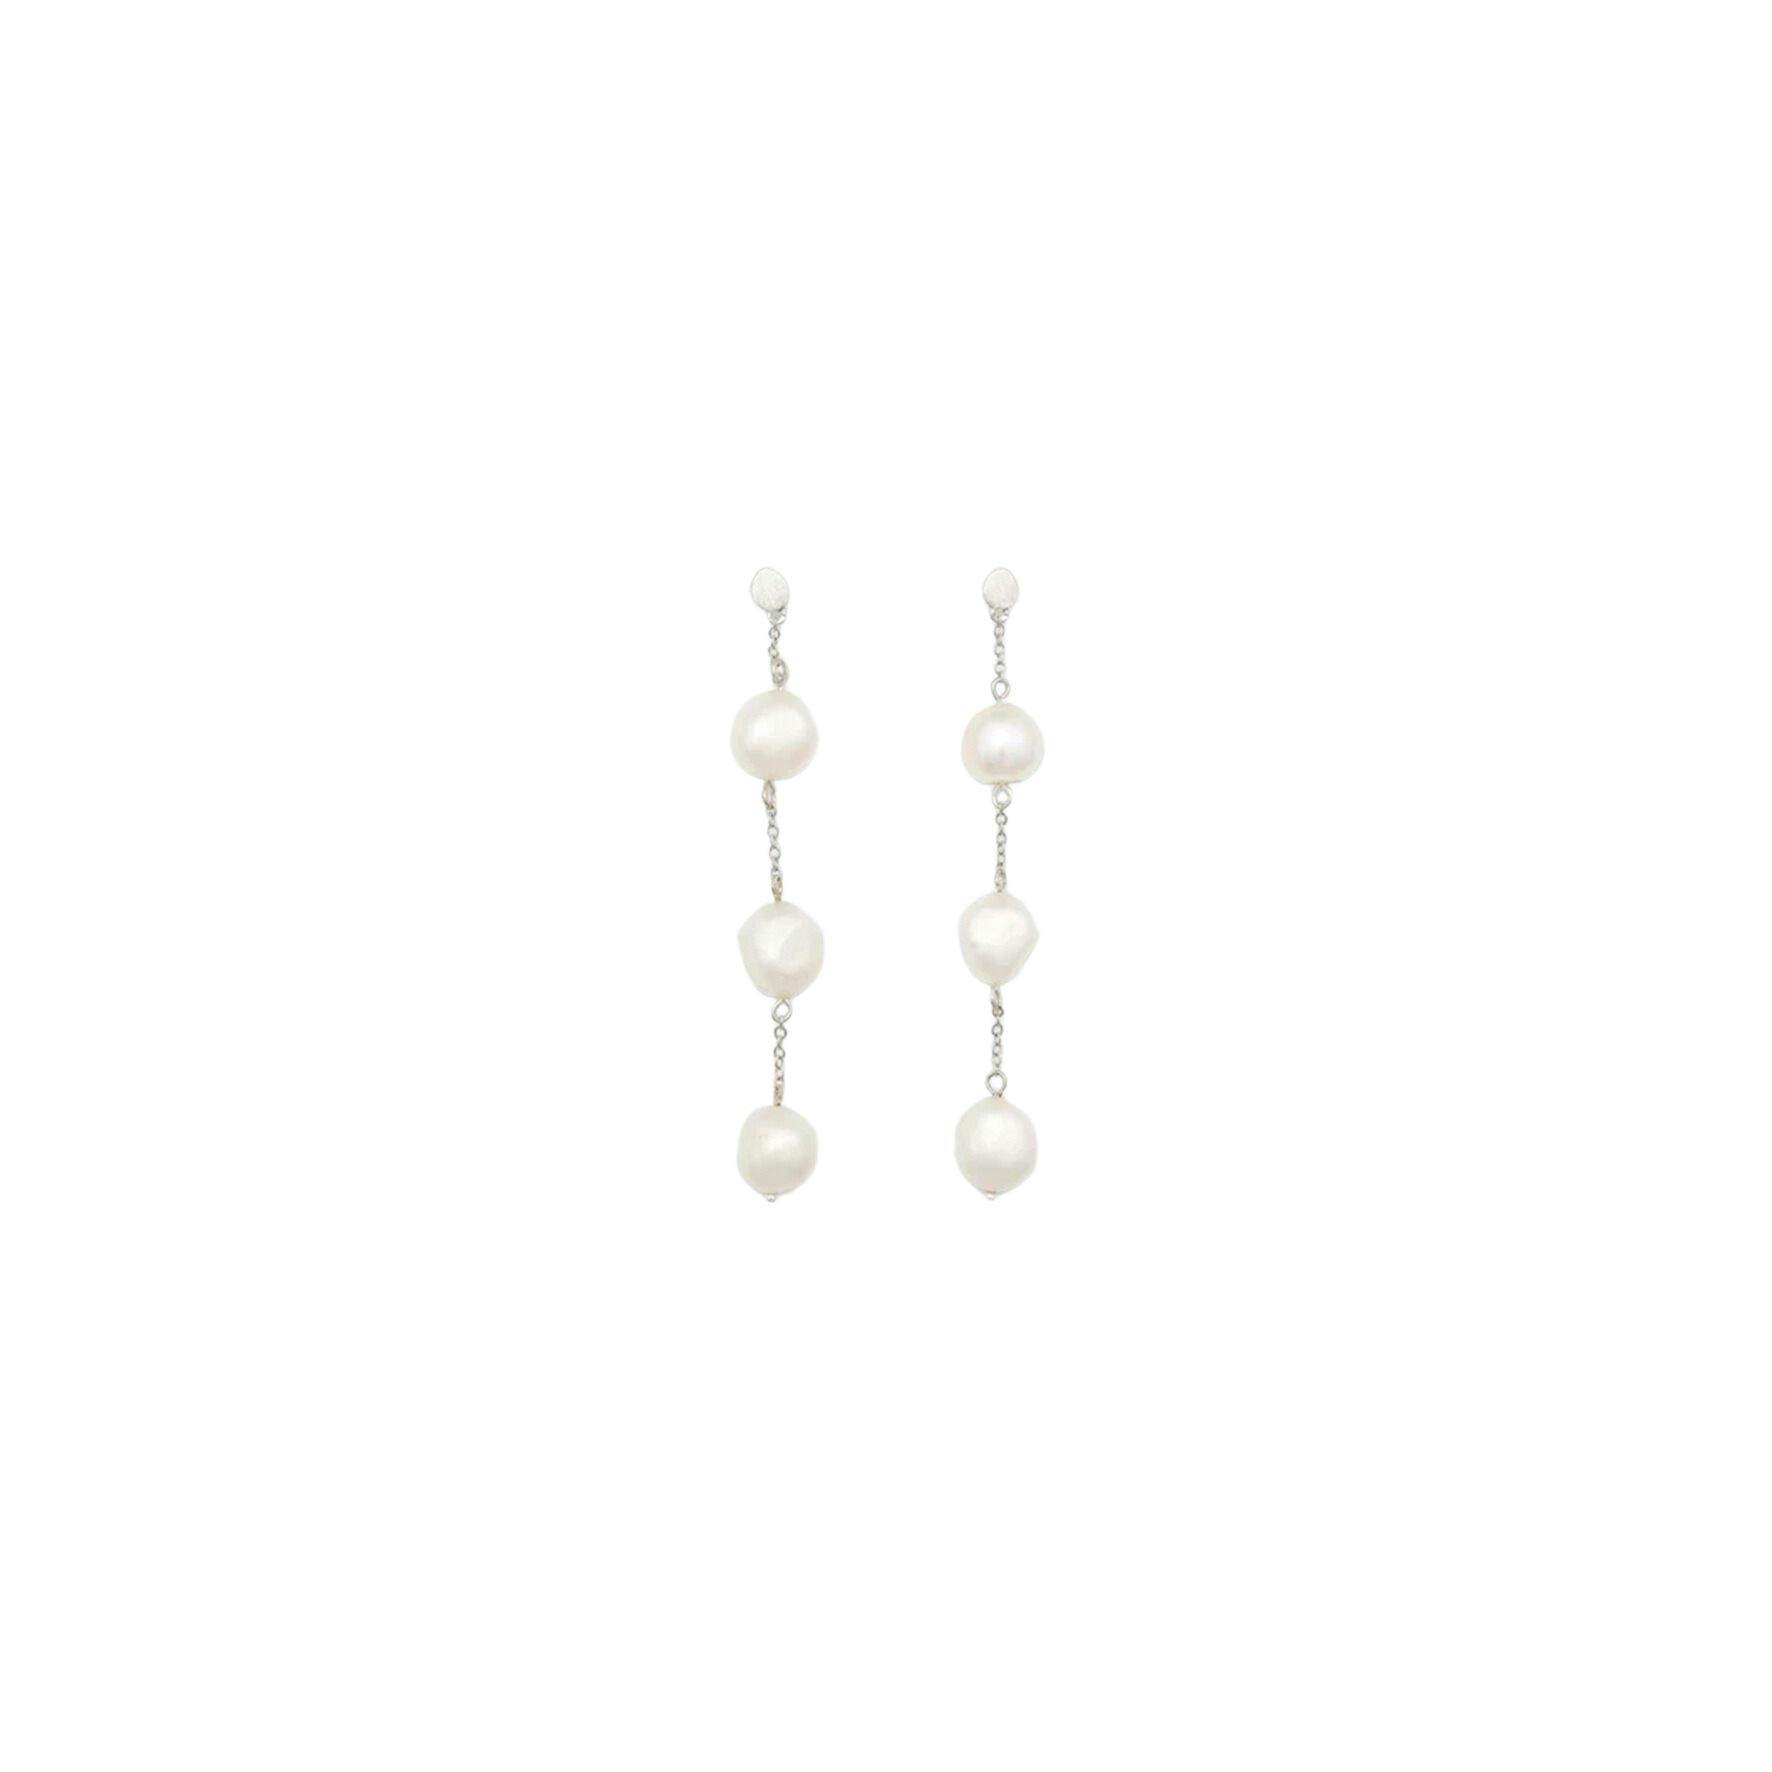 3-Pearls Earchains von Sorelle Jewellery in Silber Sterling 925